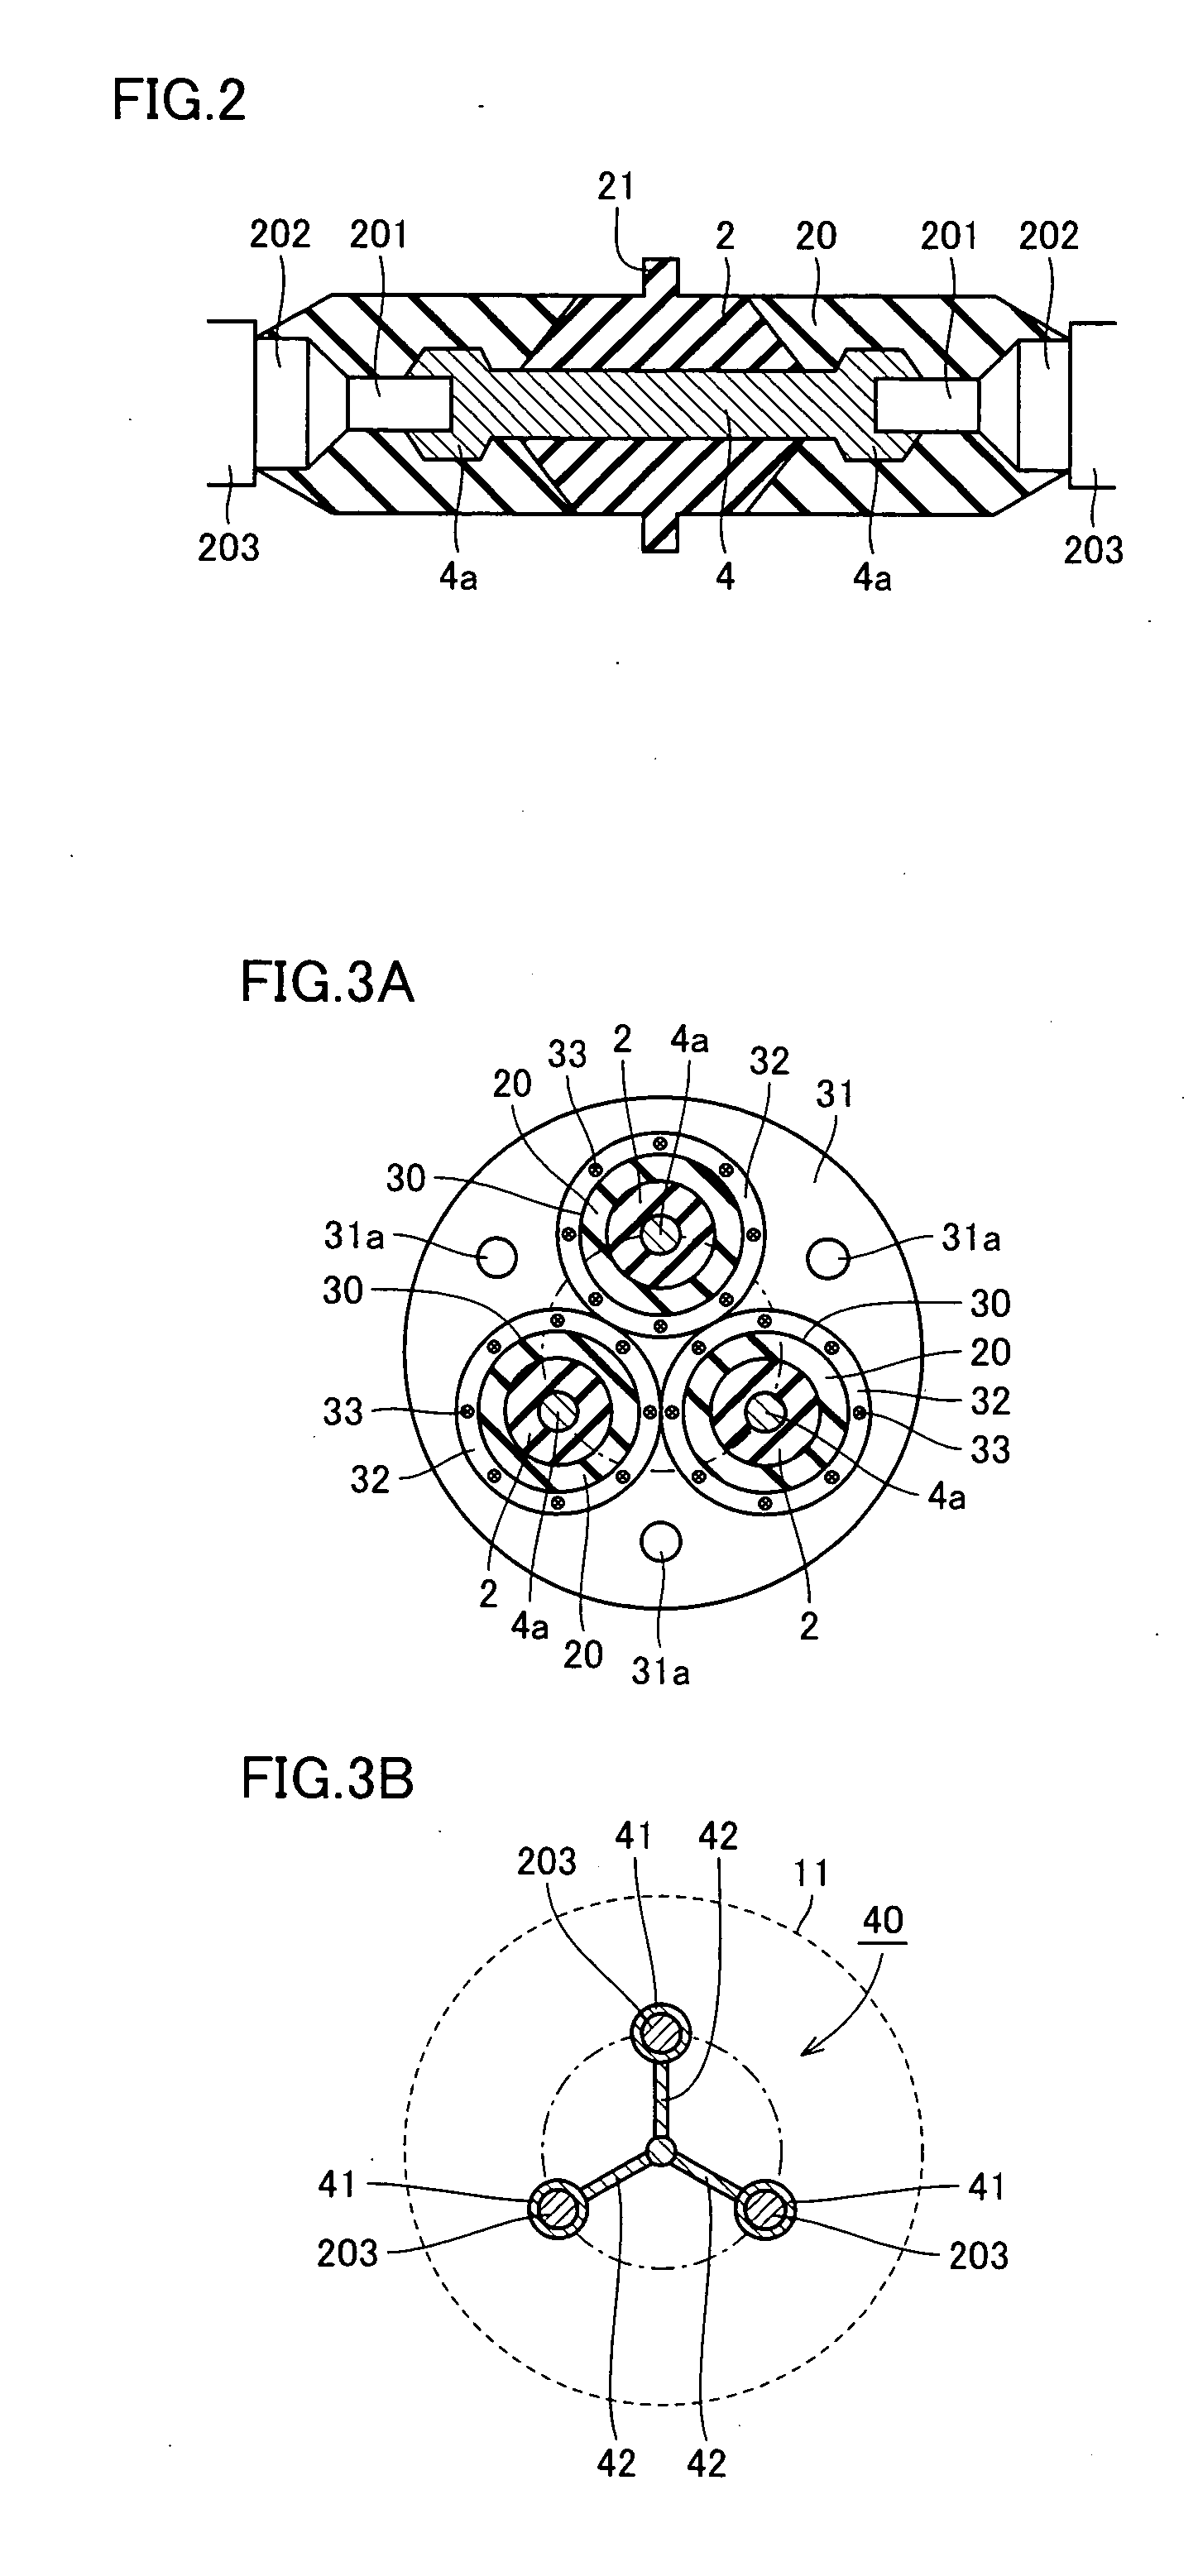 Multiphase superconducting cable connection structure and multiphase superconducting cable line